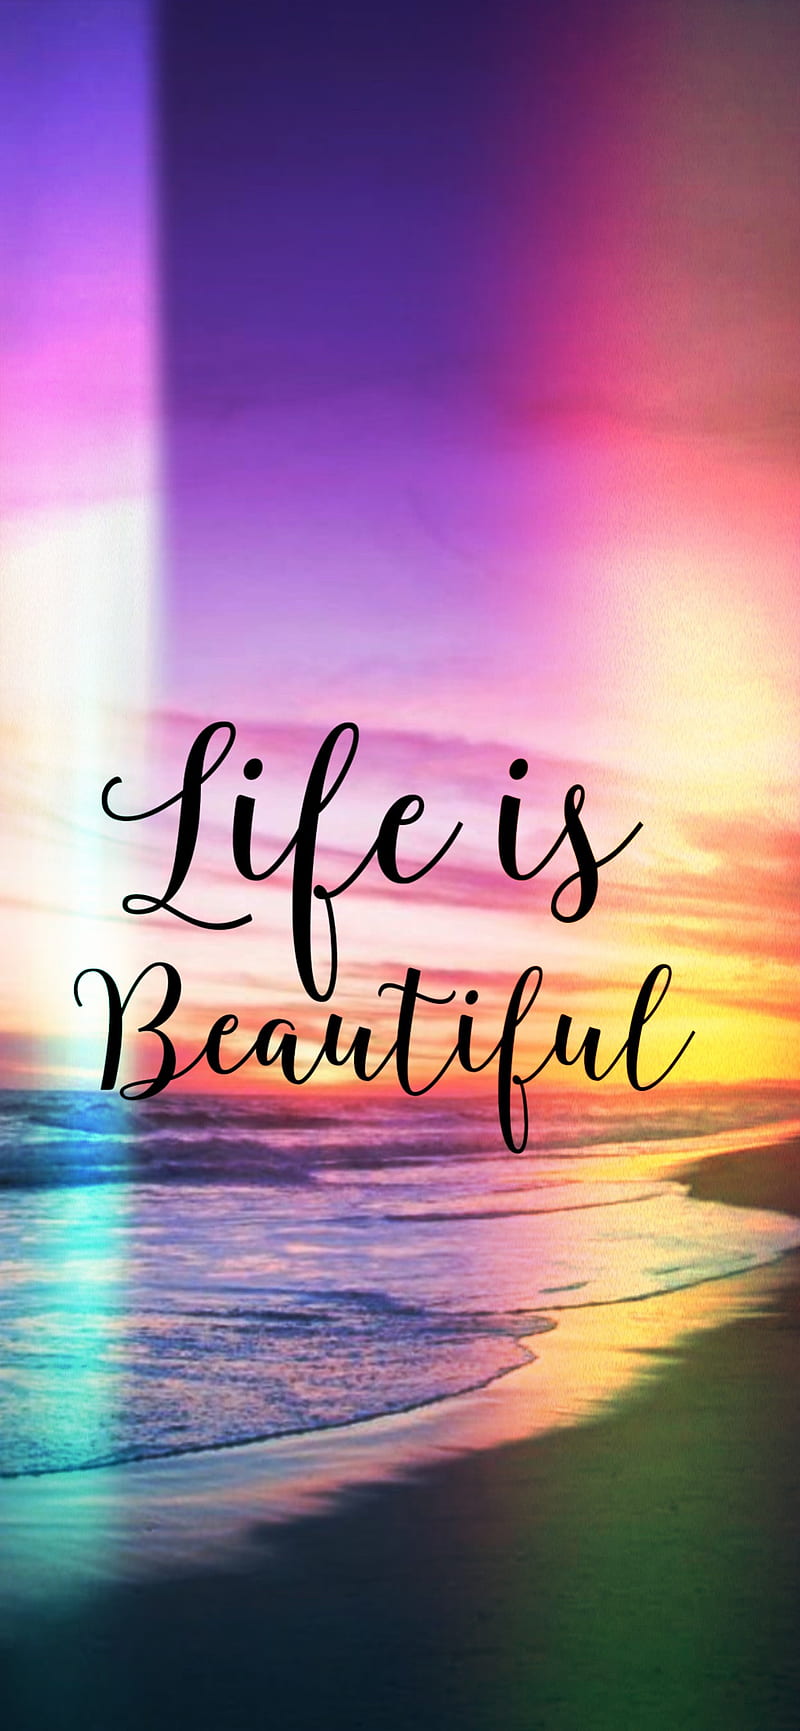 beauty quotes wallpapers